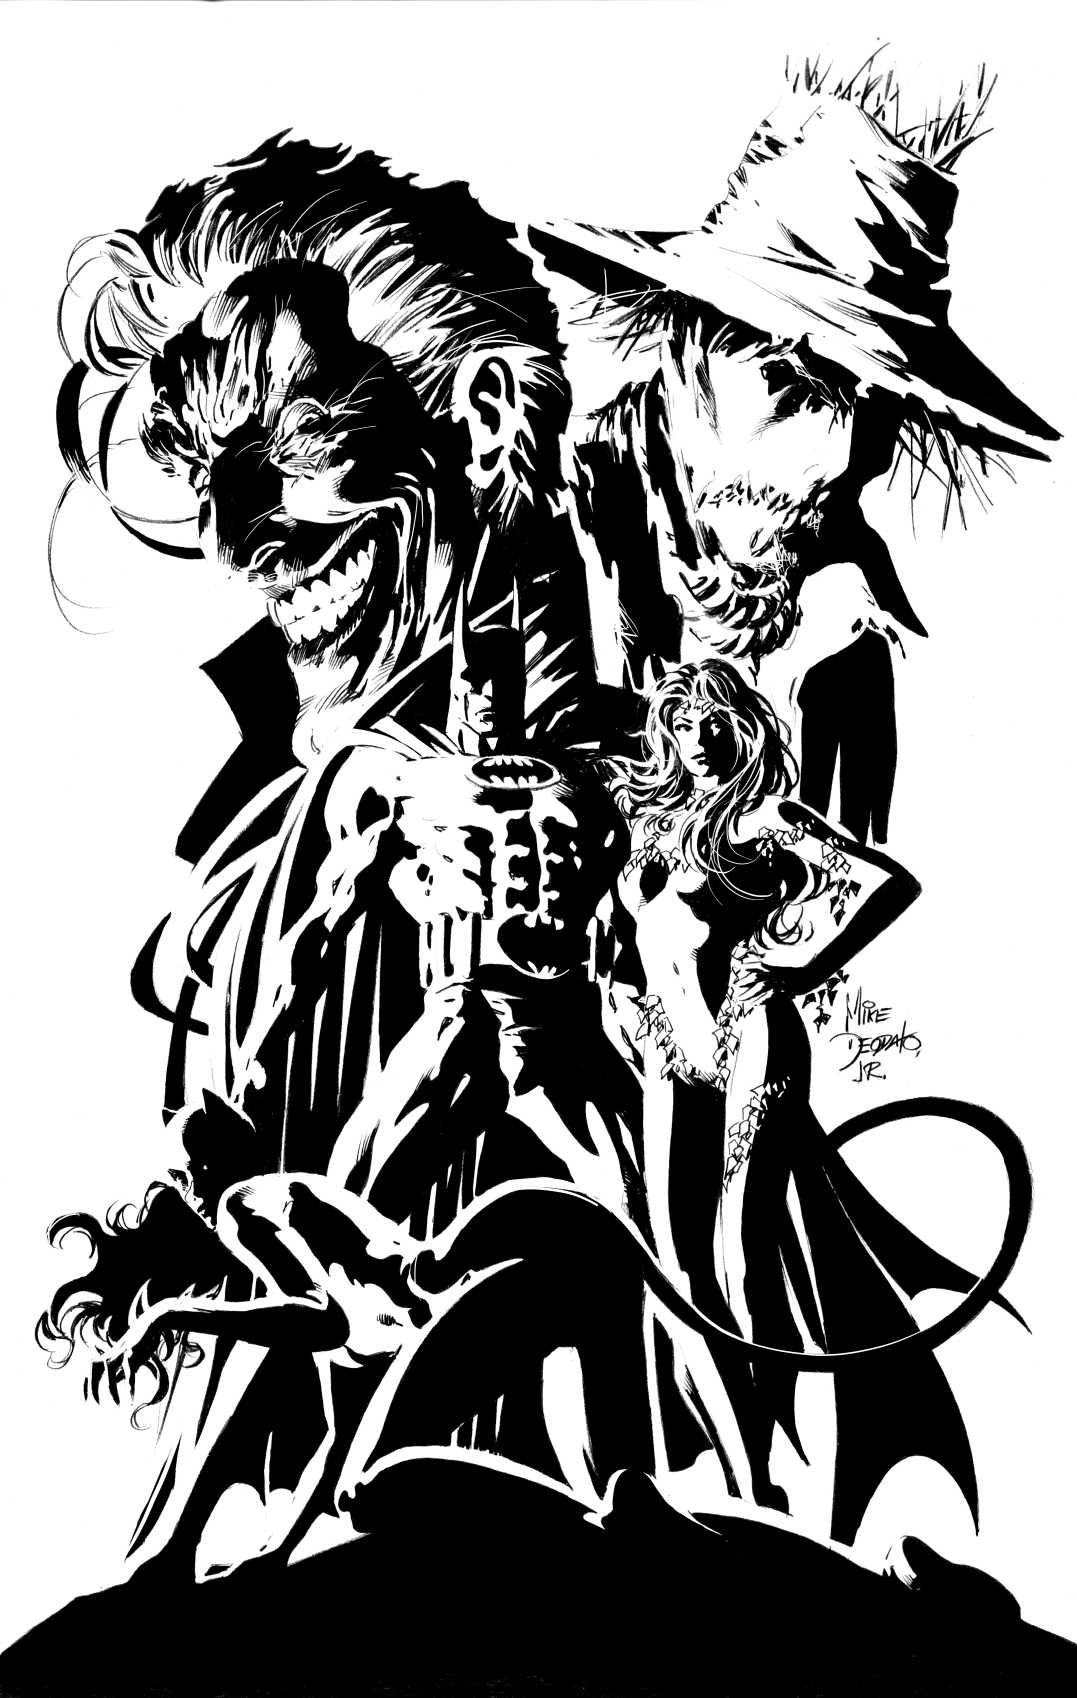 Batman and Rogues - by Mike Deodato, Jr.